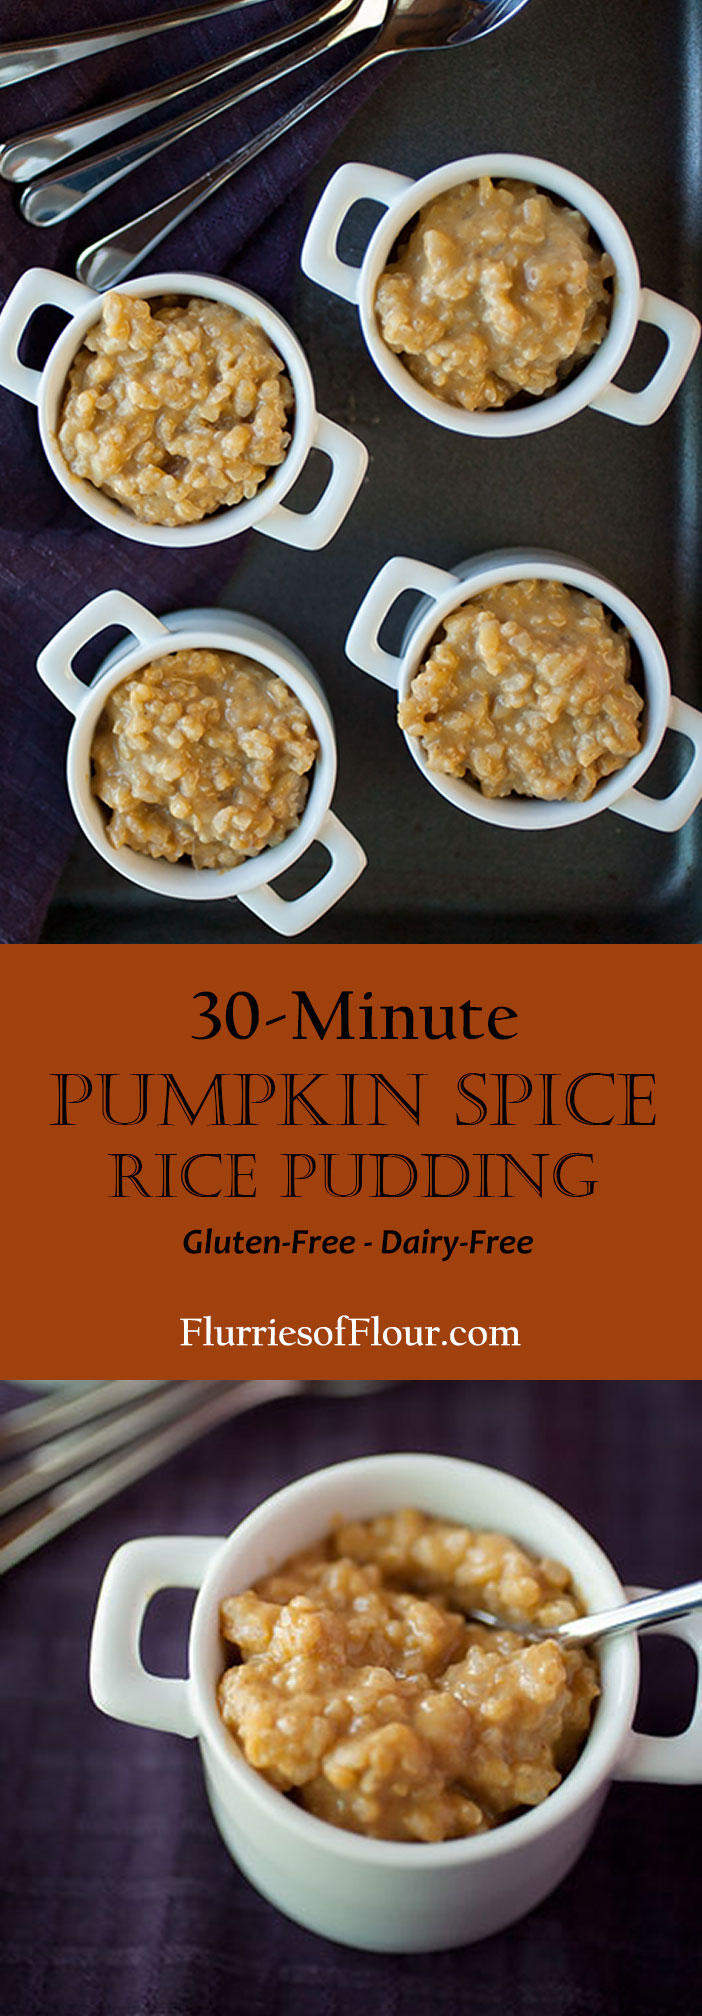 Sweet, creamy, dreamy and full of pumpkin spice flavor, this pumpkin spice rice pudding is dairy-free, gluten-free, and also ready in thirty minutes! It's a quick, easy, and delicious fall dessert!